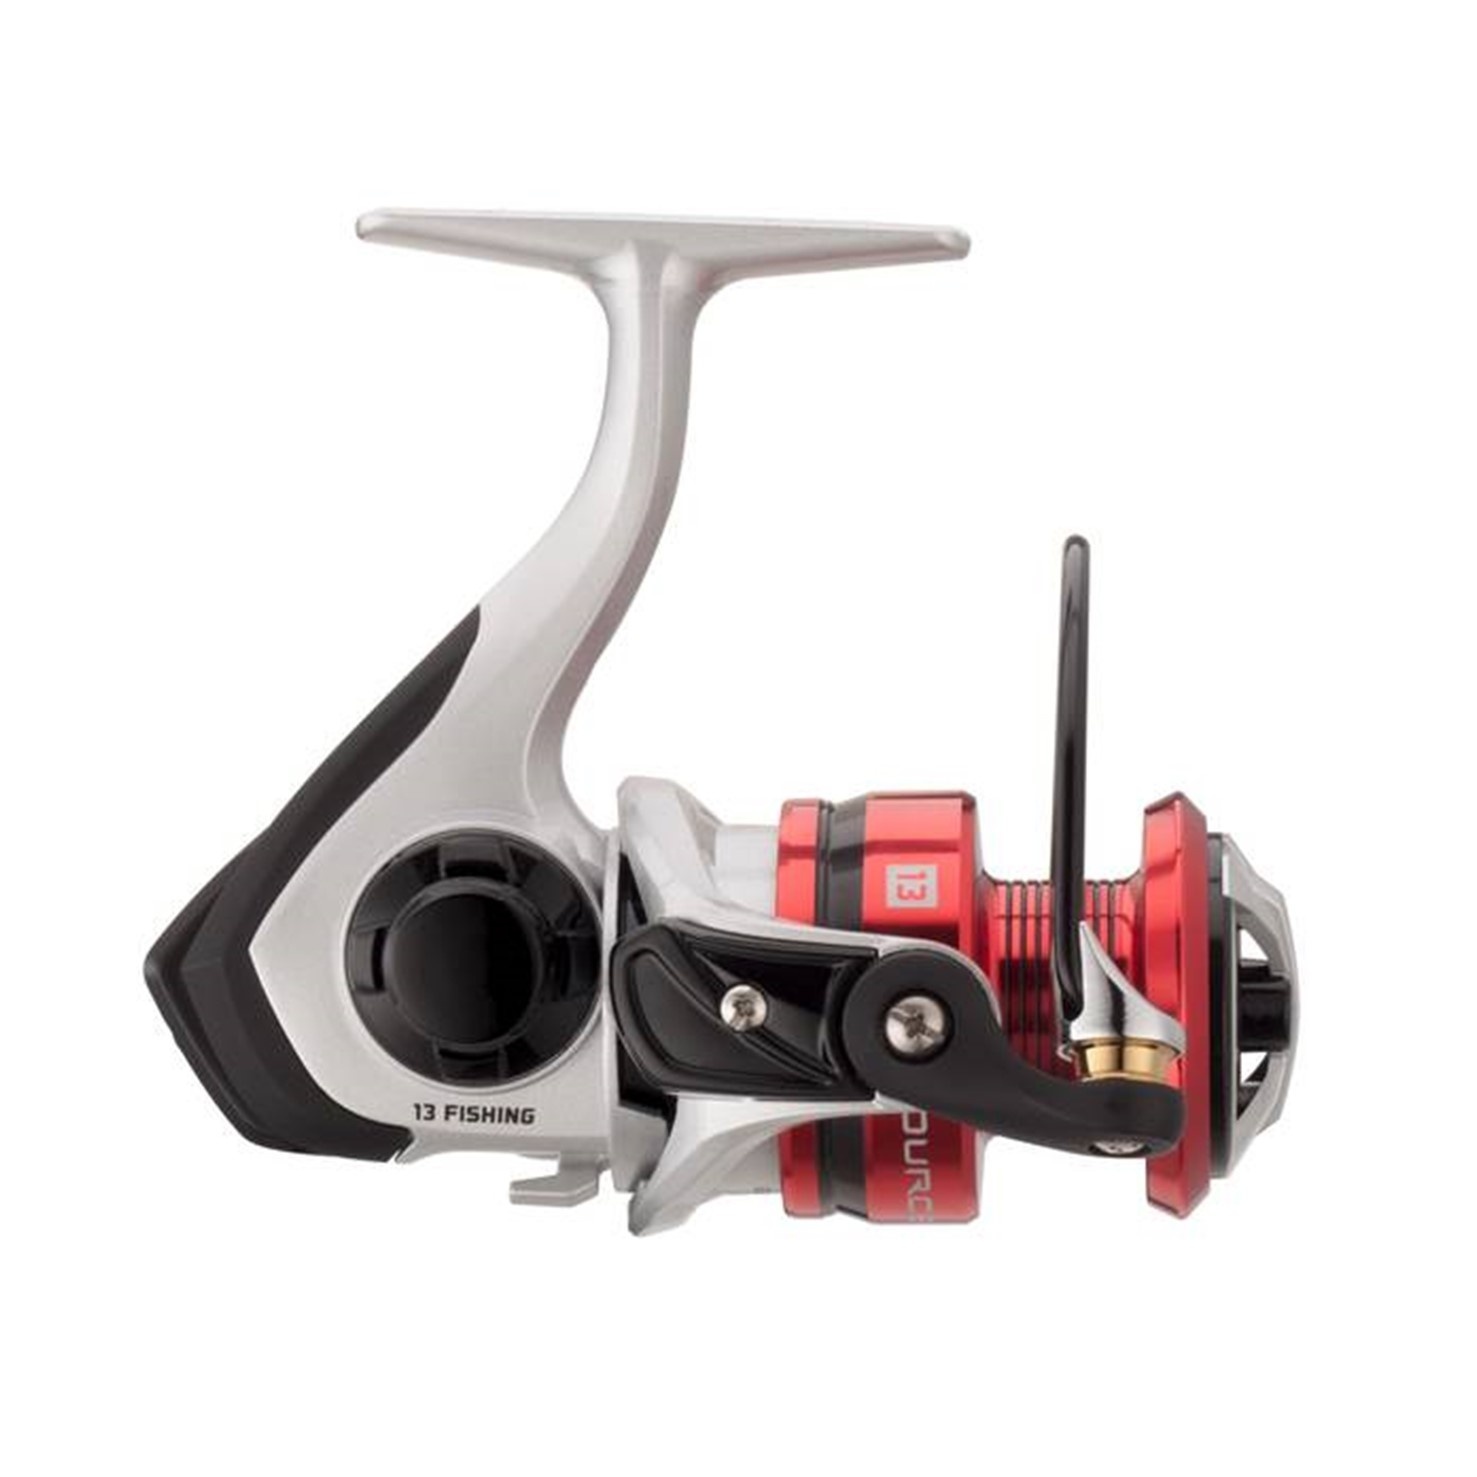 13 Fishing Source F Spinning Reel 3.0 Size -5.2:1